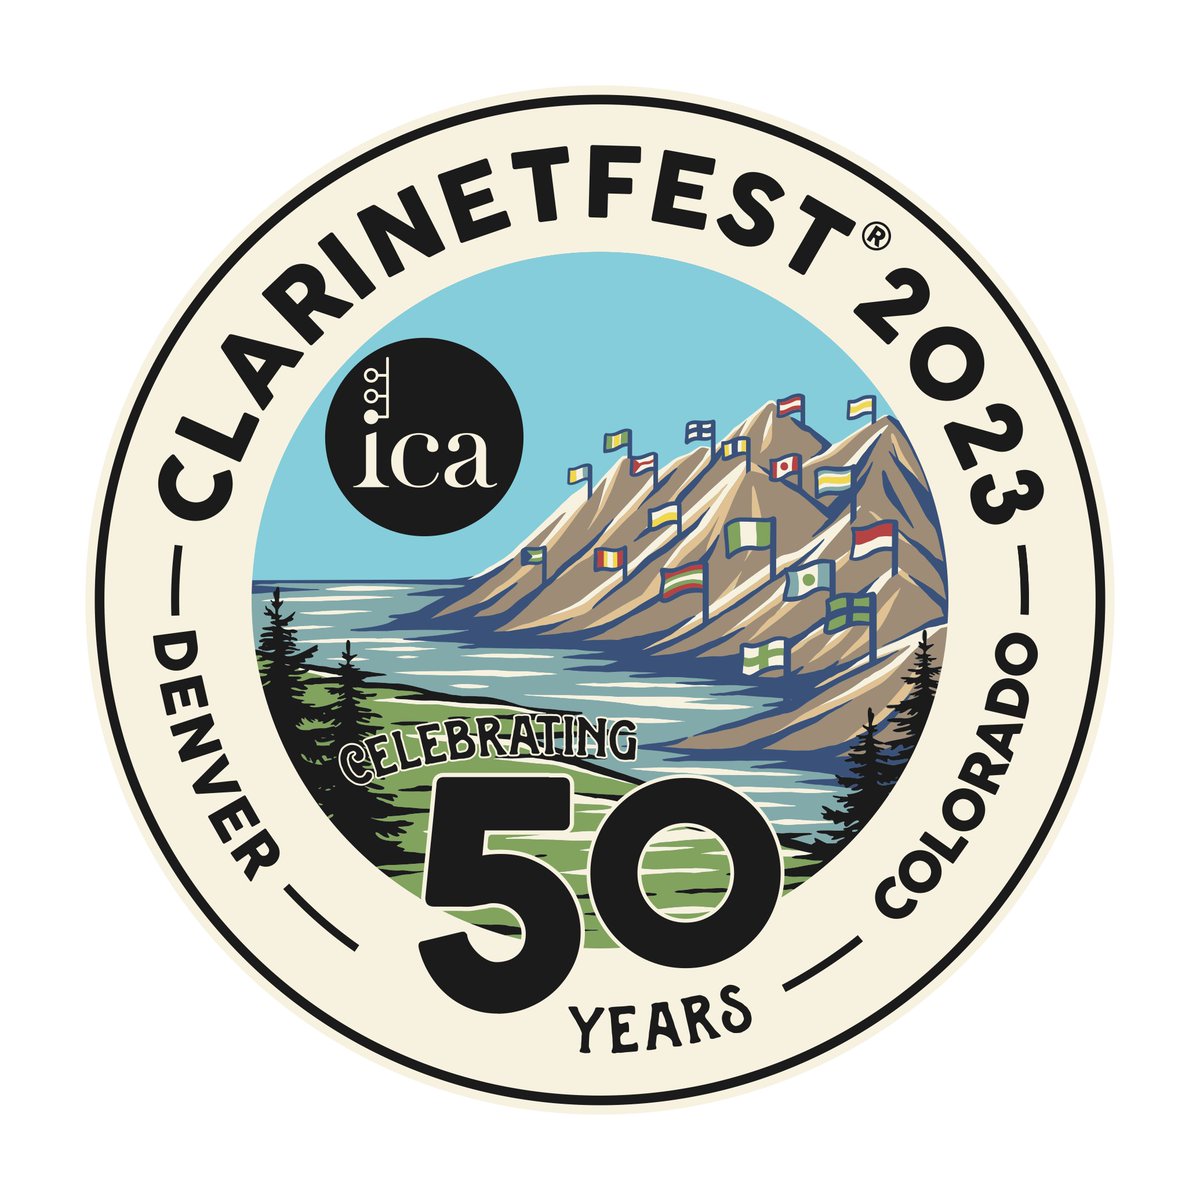 We're gearing up to attend #ClarinetFest2023 this coming week - and hope to see you there! PLEASE NOTE that as this event takes us away from our office, any orders for hard copy sheet music received July 4-9 will be shipped after our return, beginning Monday, July 10.